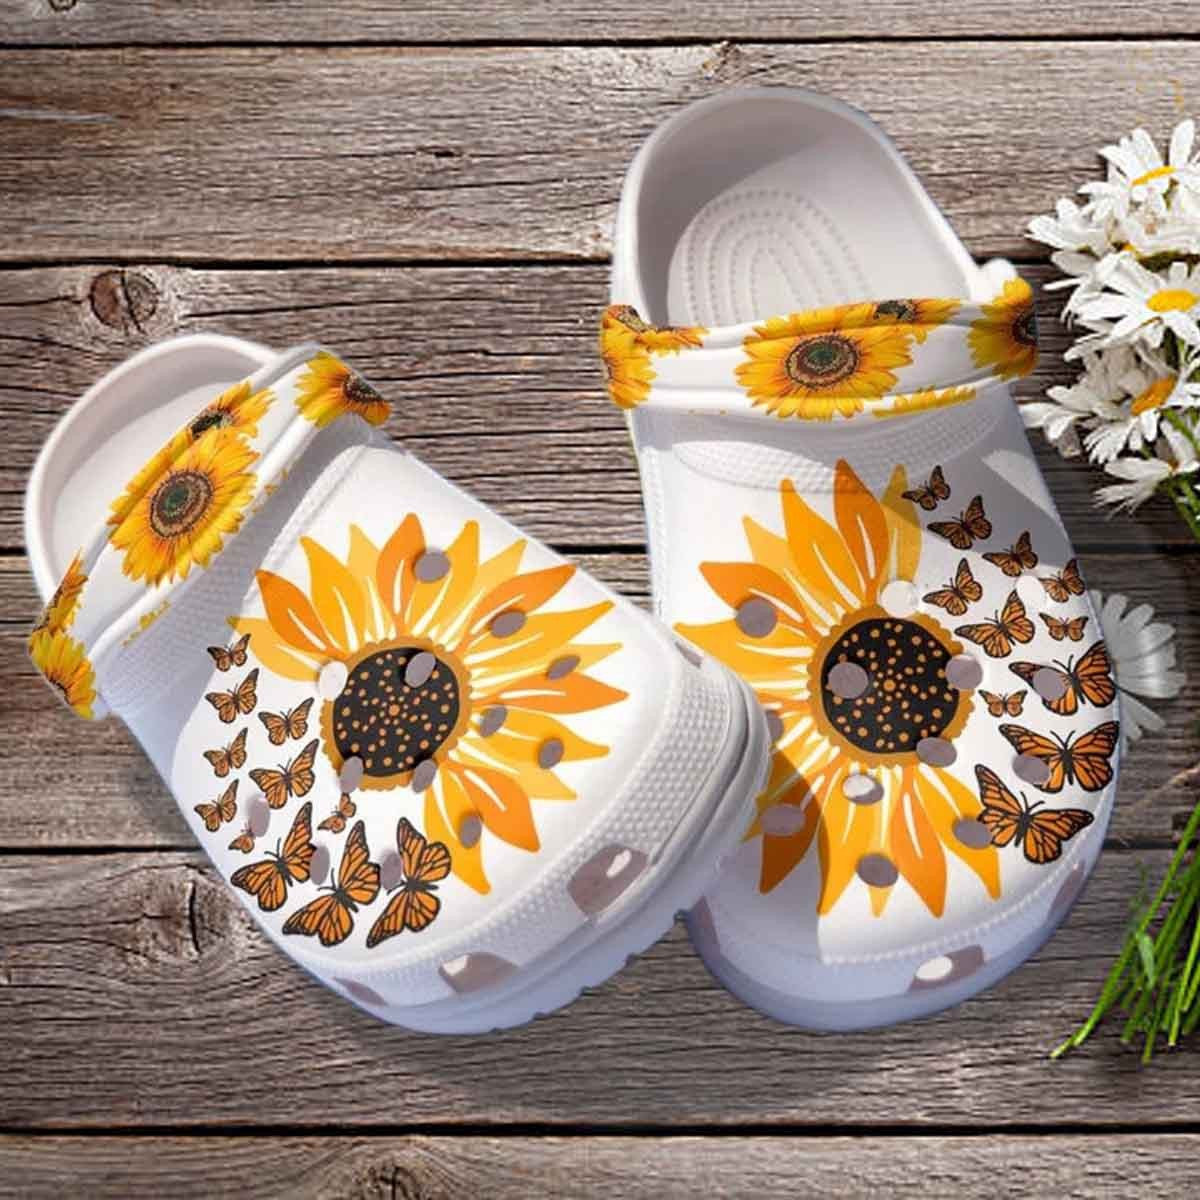 Be Kind Sunflower Butterfly Crocs Shoes Clogs - Sunflower Crocs Shoes Birthday Gift For Daughter